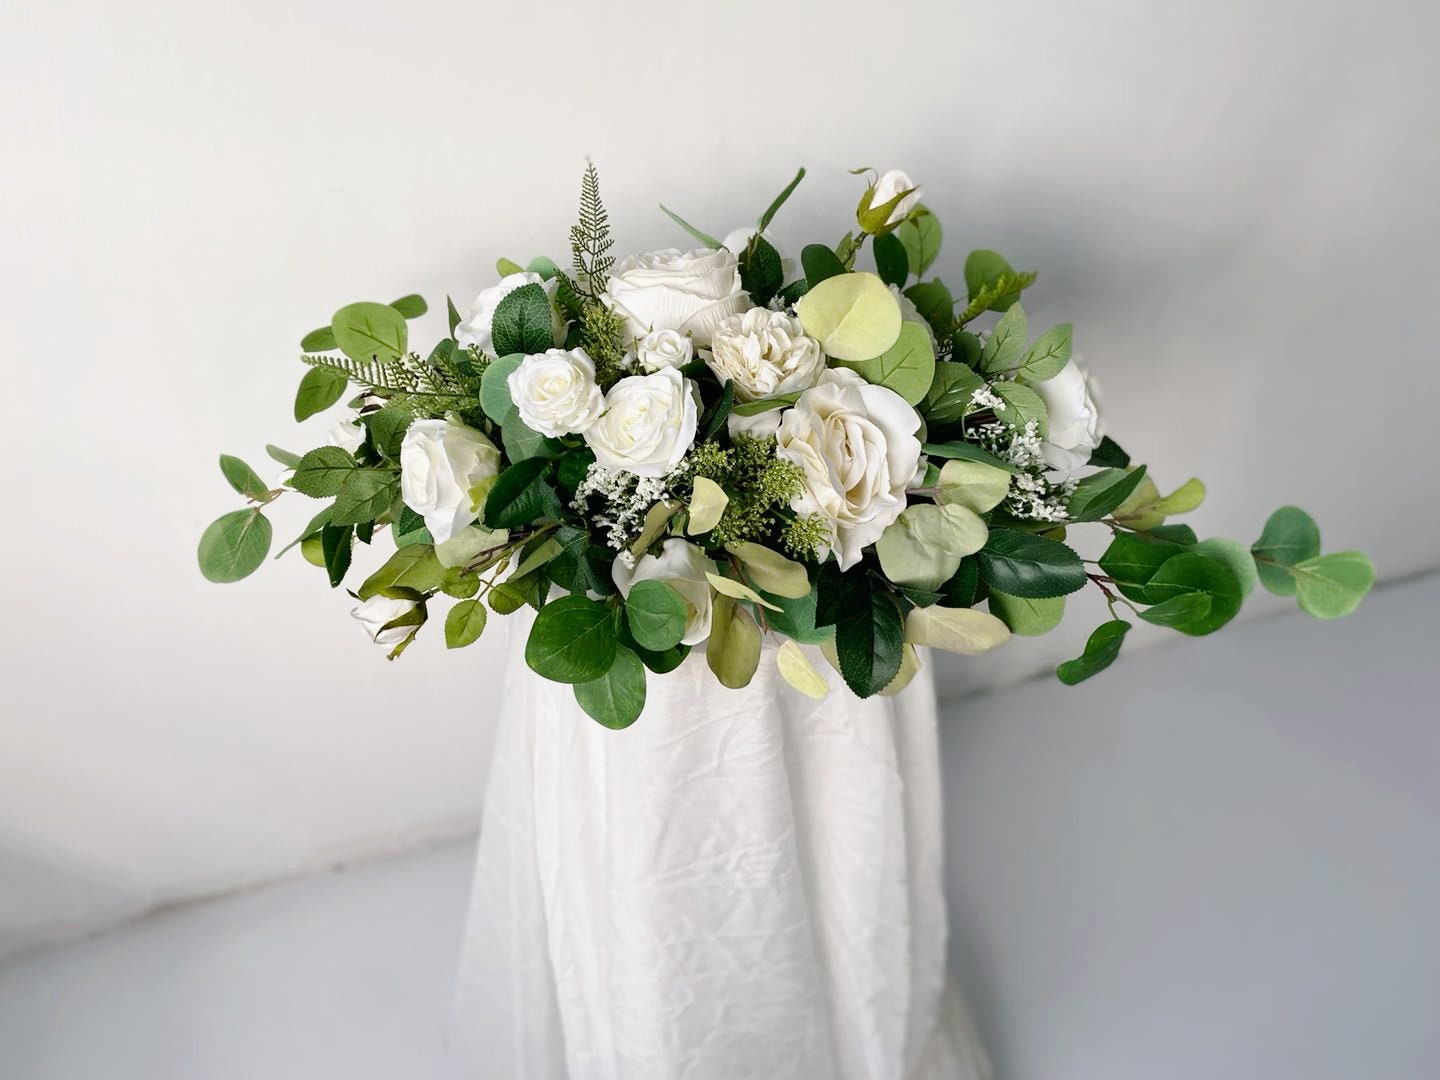 Umigy White Artificial Flowers with Vase Spring Table Centerpiece White  Roses Floral Arrangement Faux Flower Stems Fake Plant Eucalyptus for  Wedding